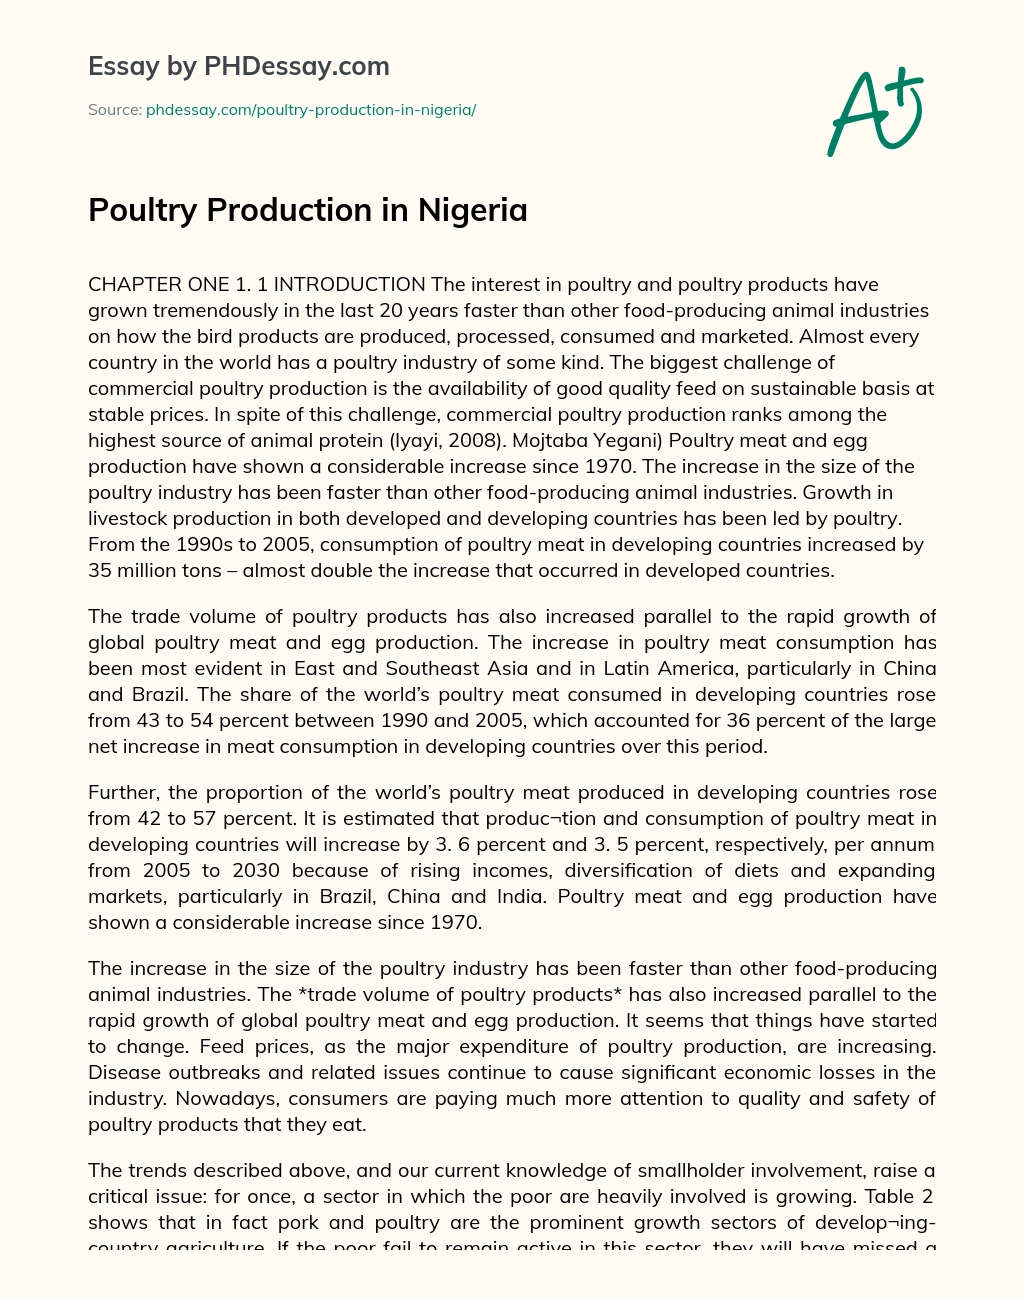 short literature review on poultry production in nigeria